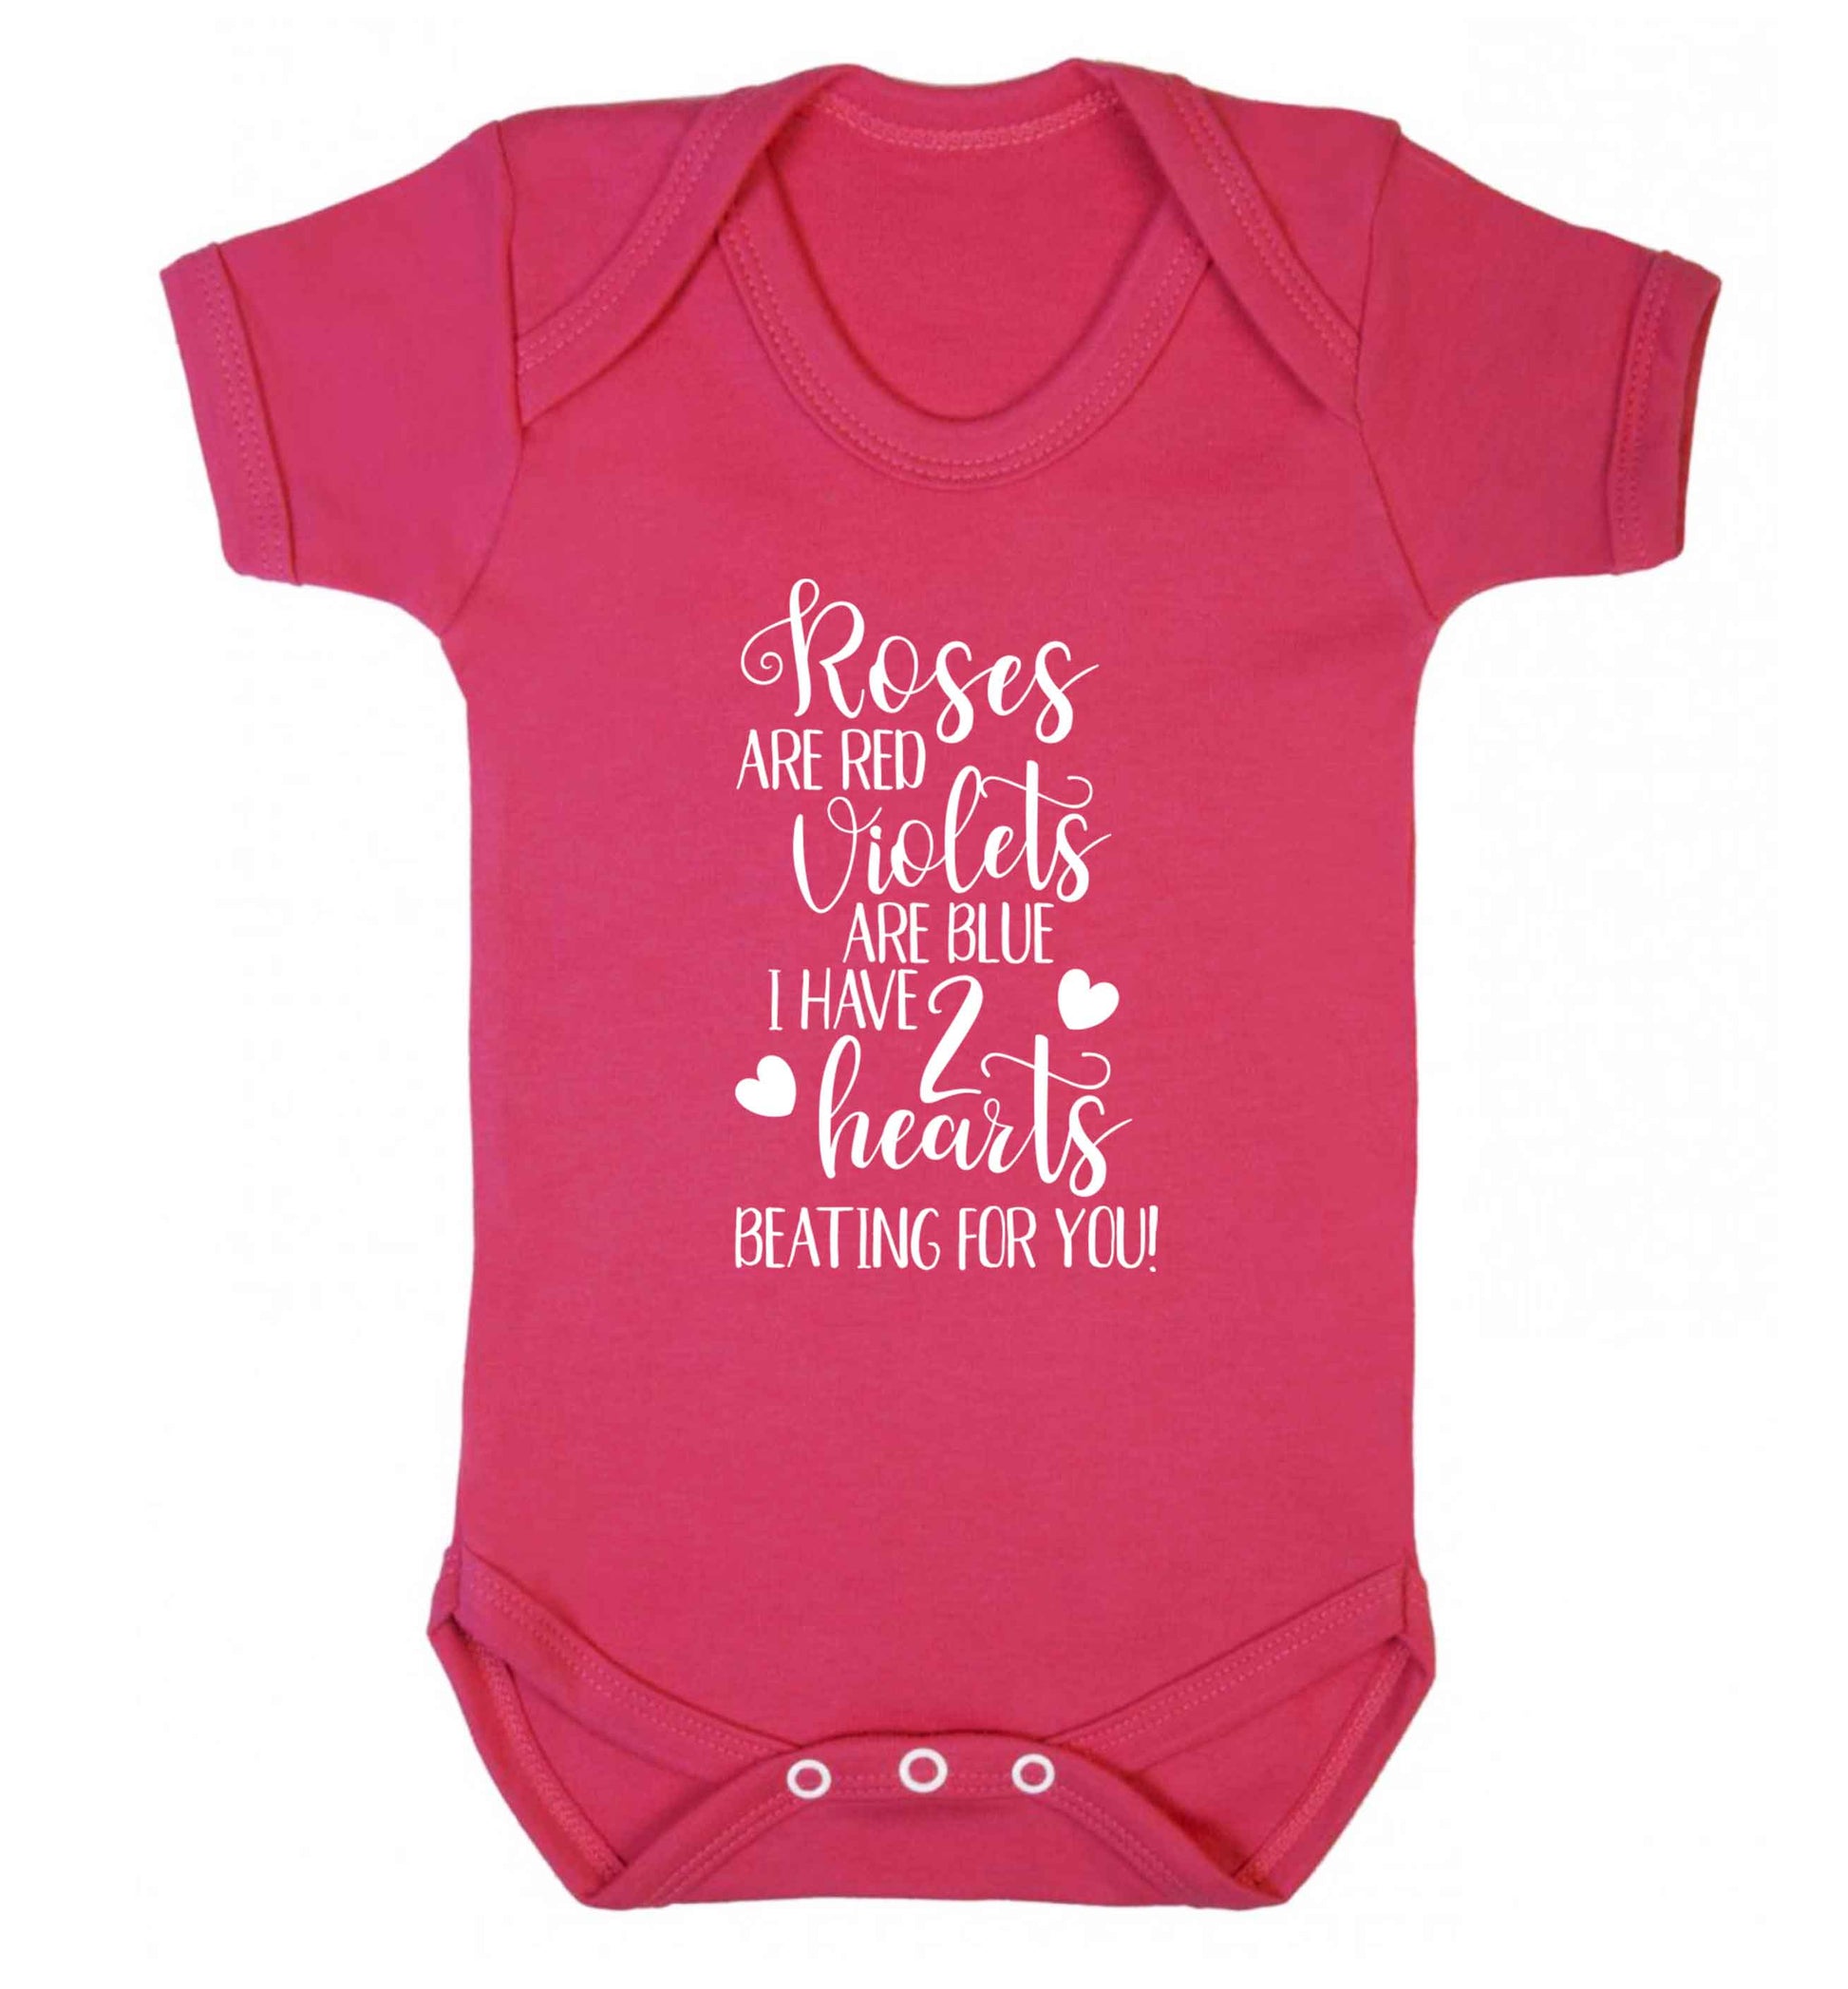 Roses are red violets are blue I have two hearts beating for you Baby Vest dark pink 18-24 months